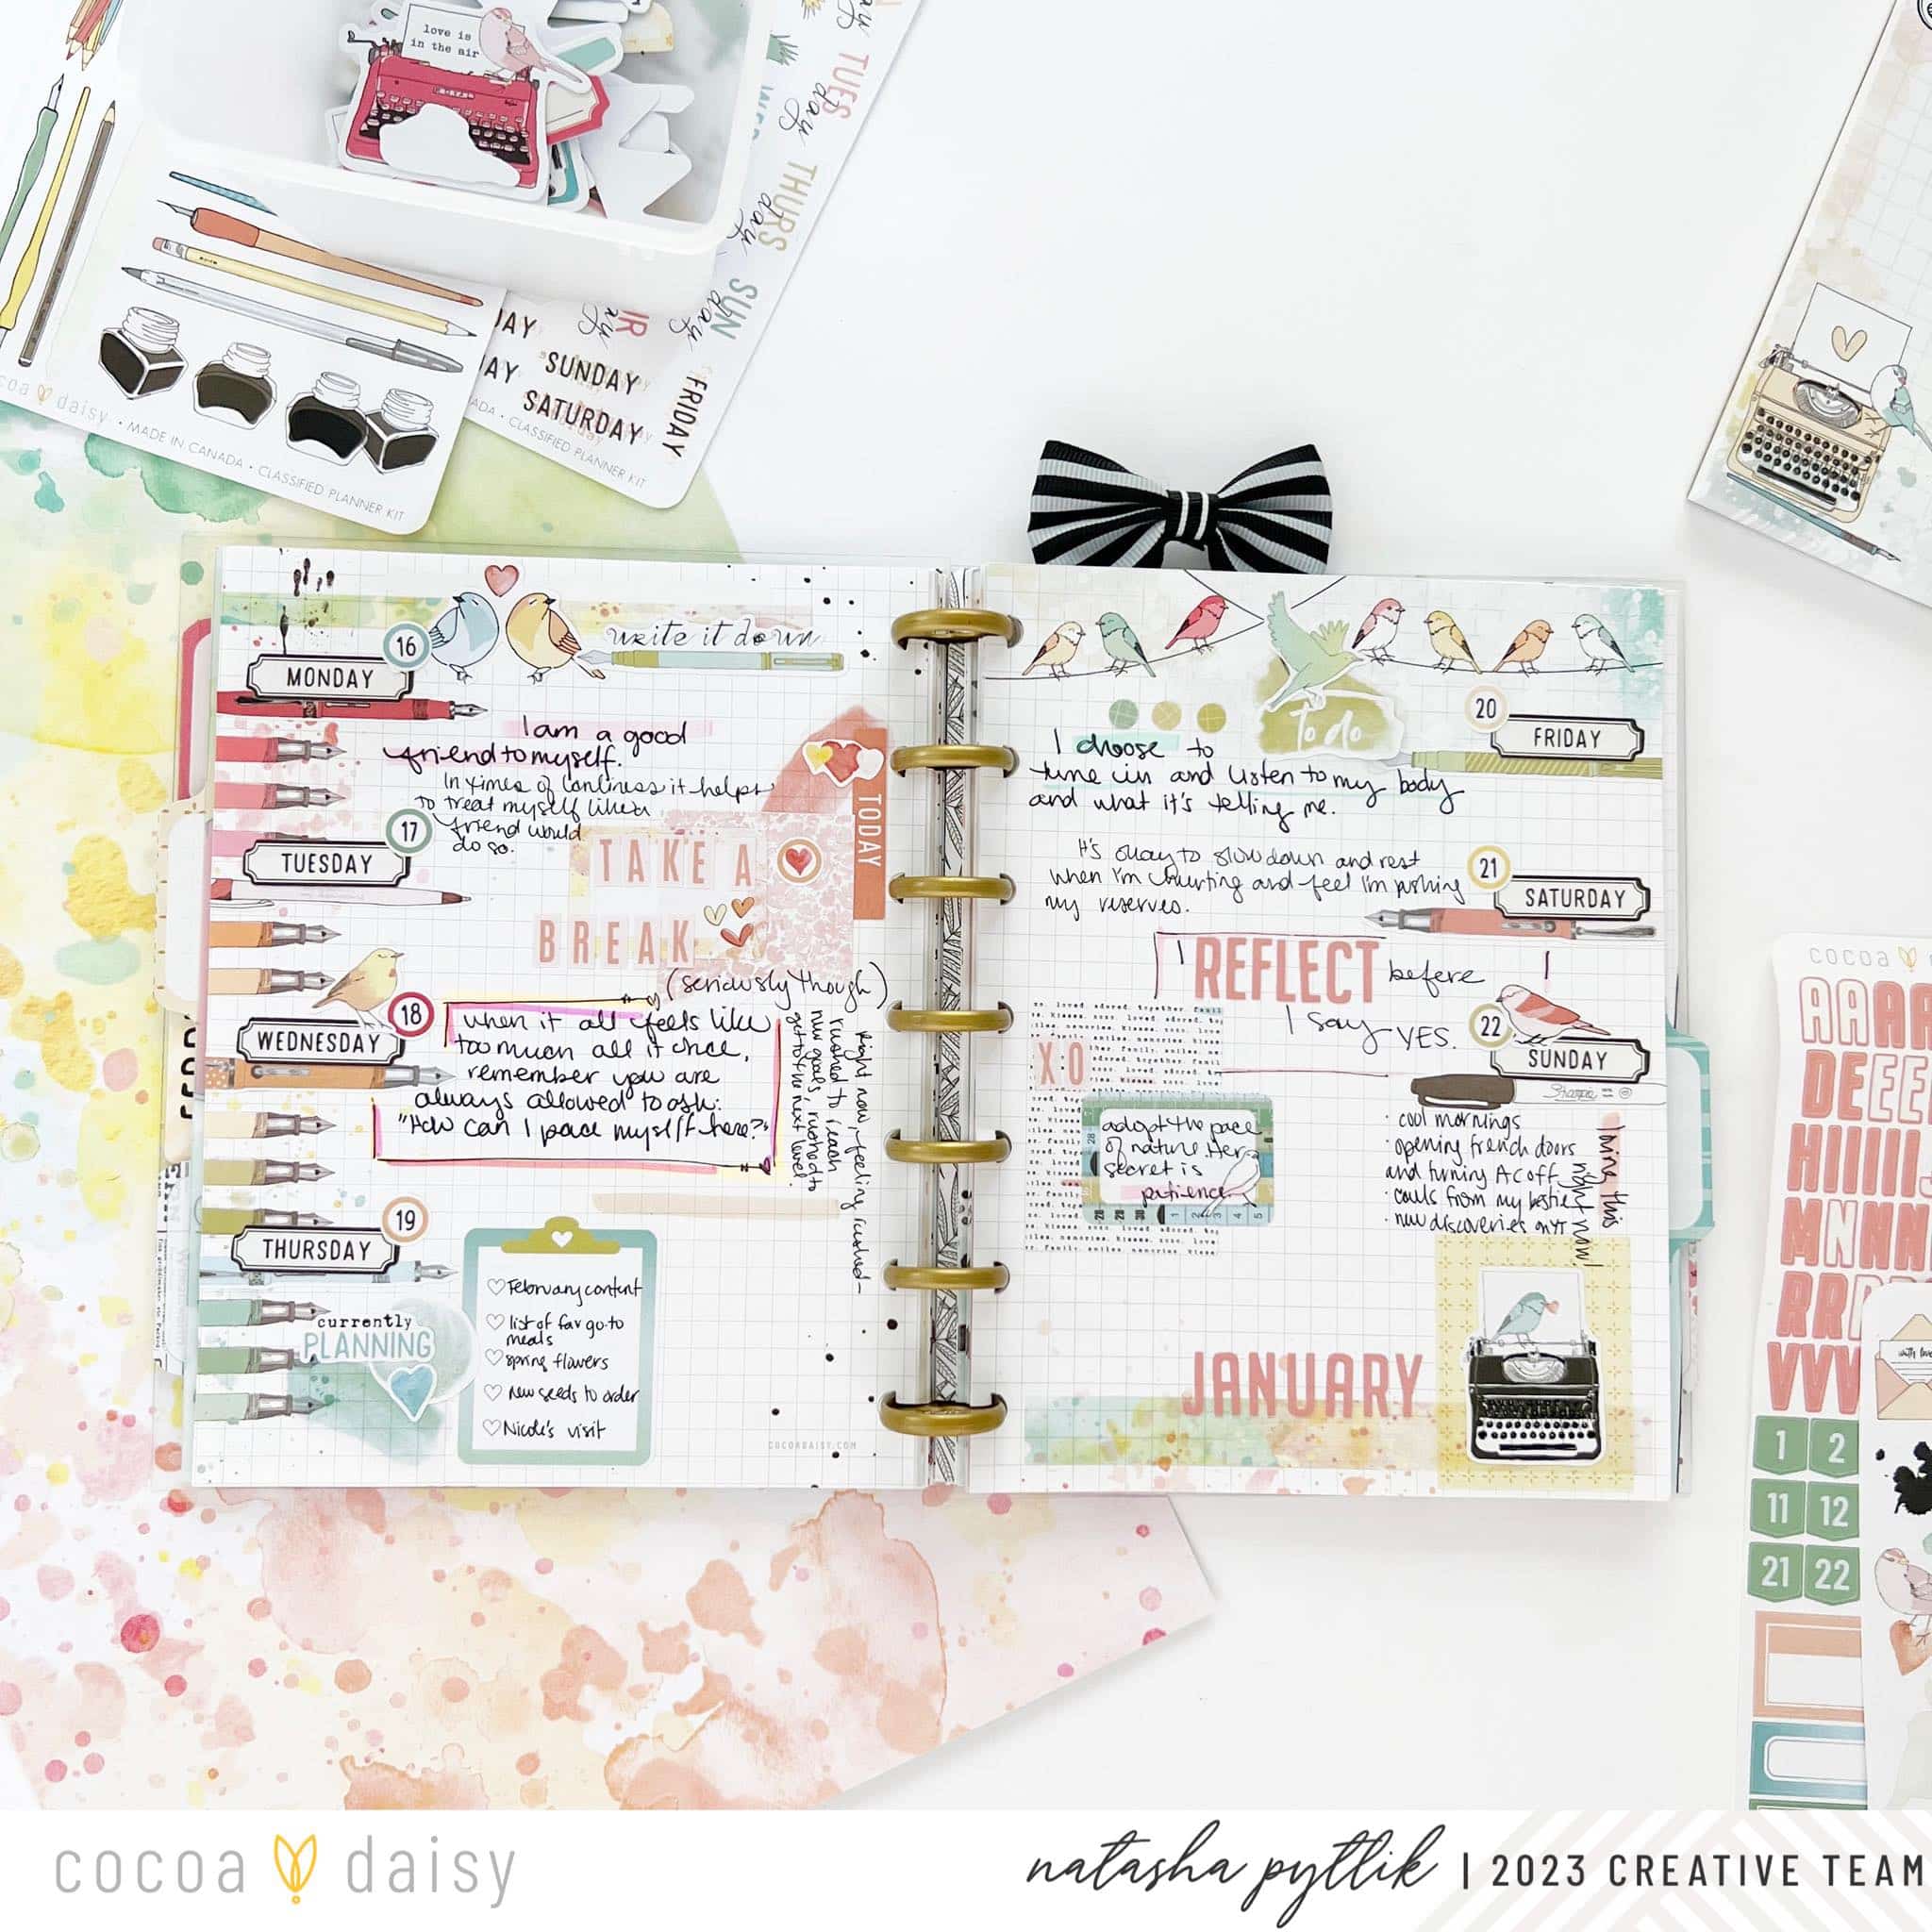 Daily Journal Days of the Week Planner Add On Sticker Sheet – Cocoa Daisy